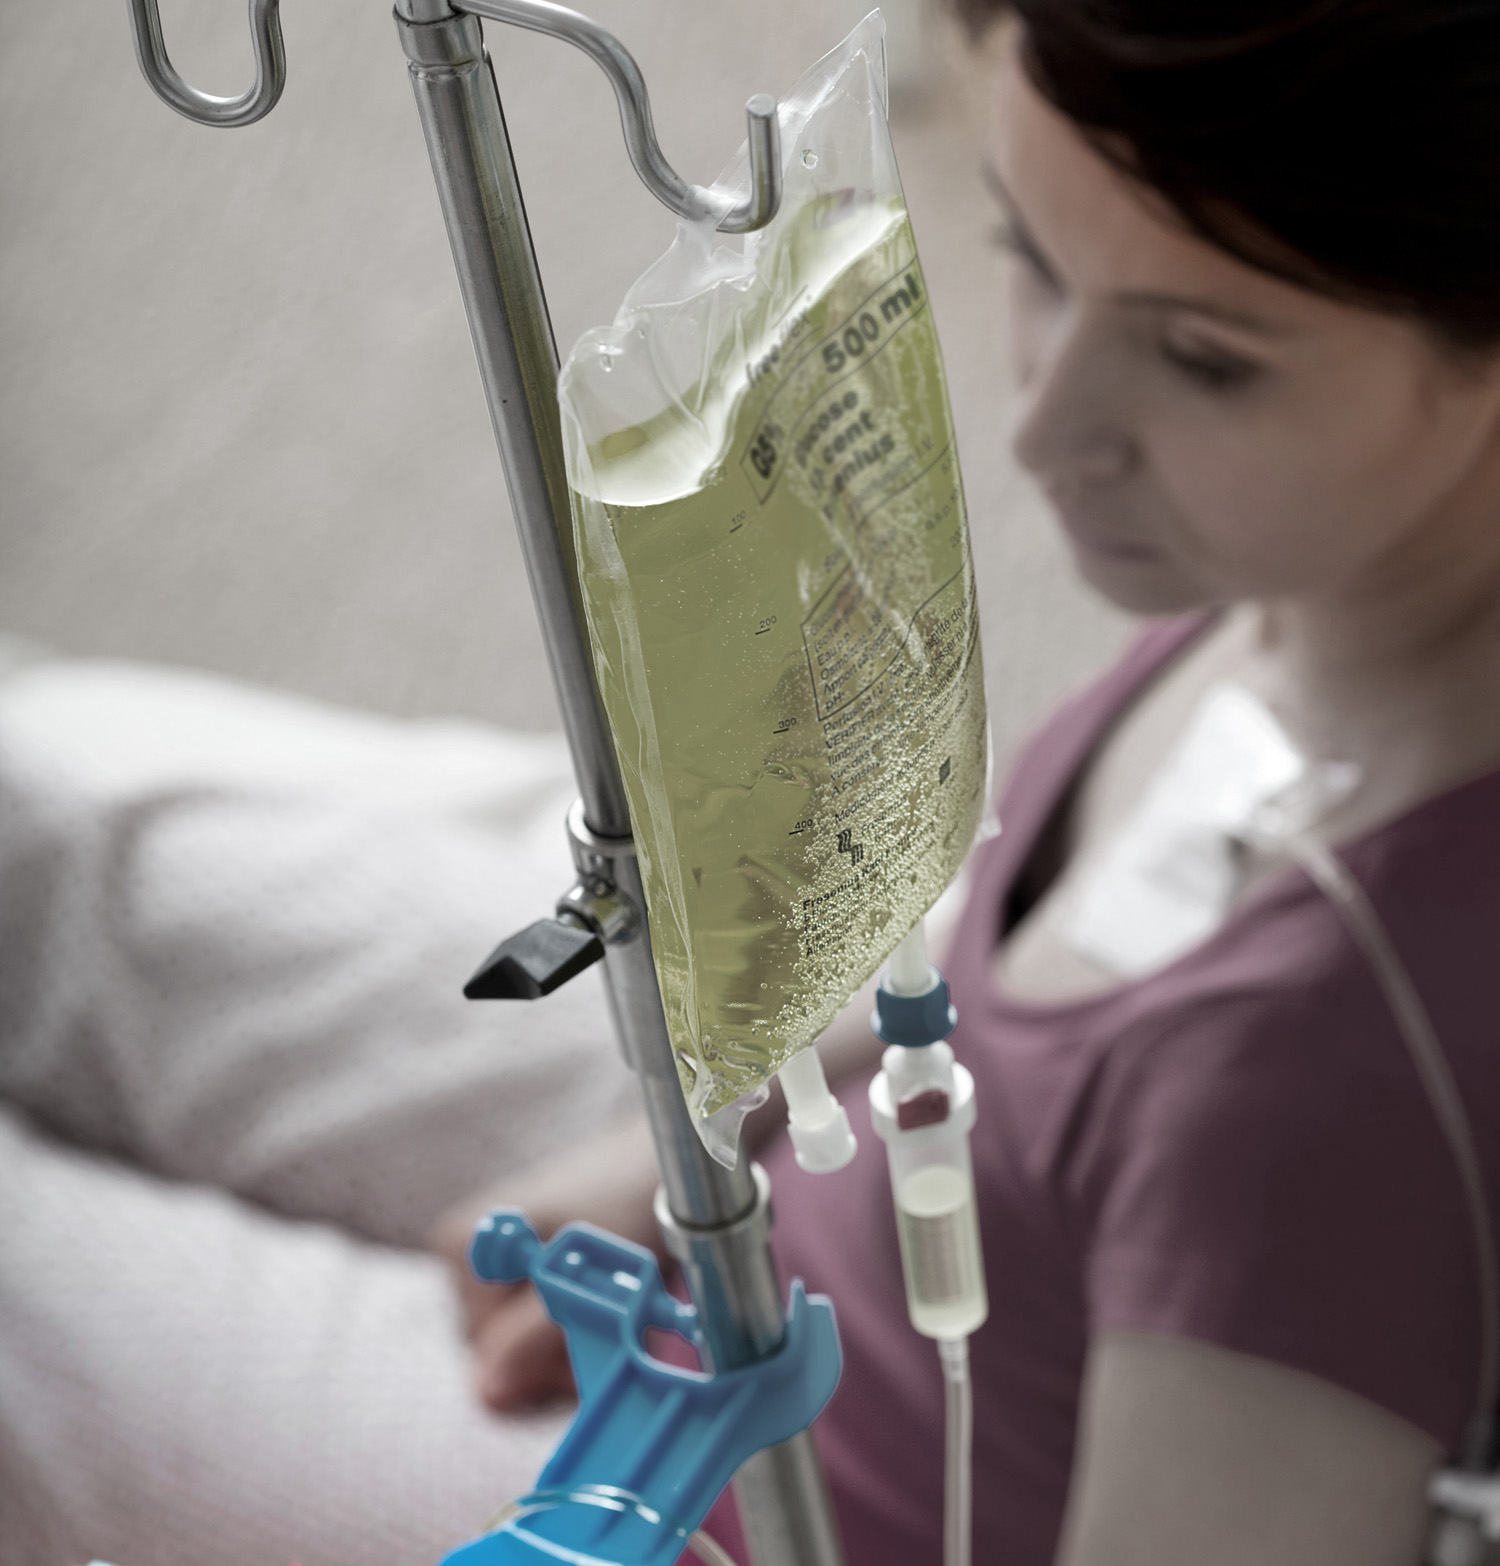 Female patient hooked up to IV infusion pump illustrative of lymphodepletion